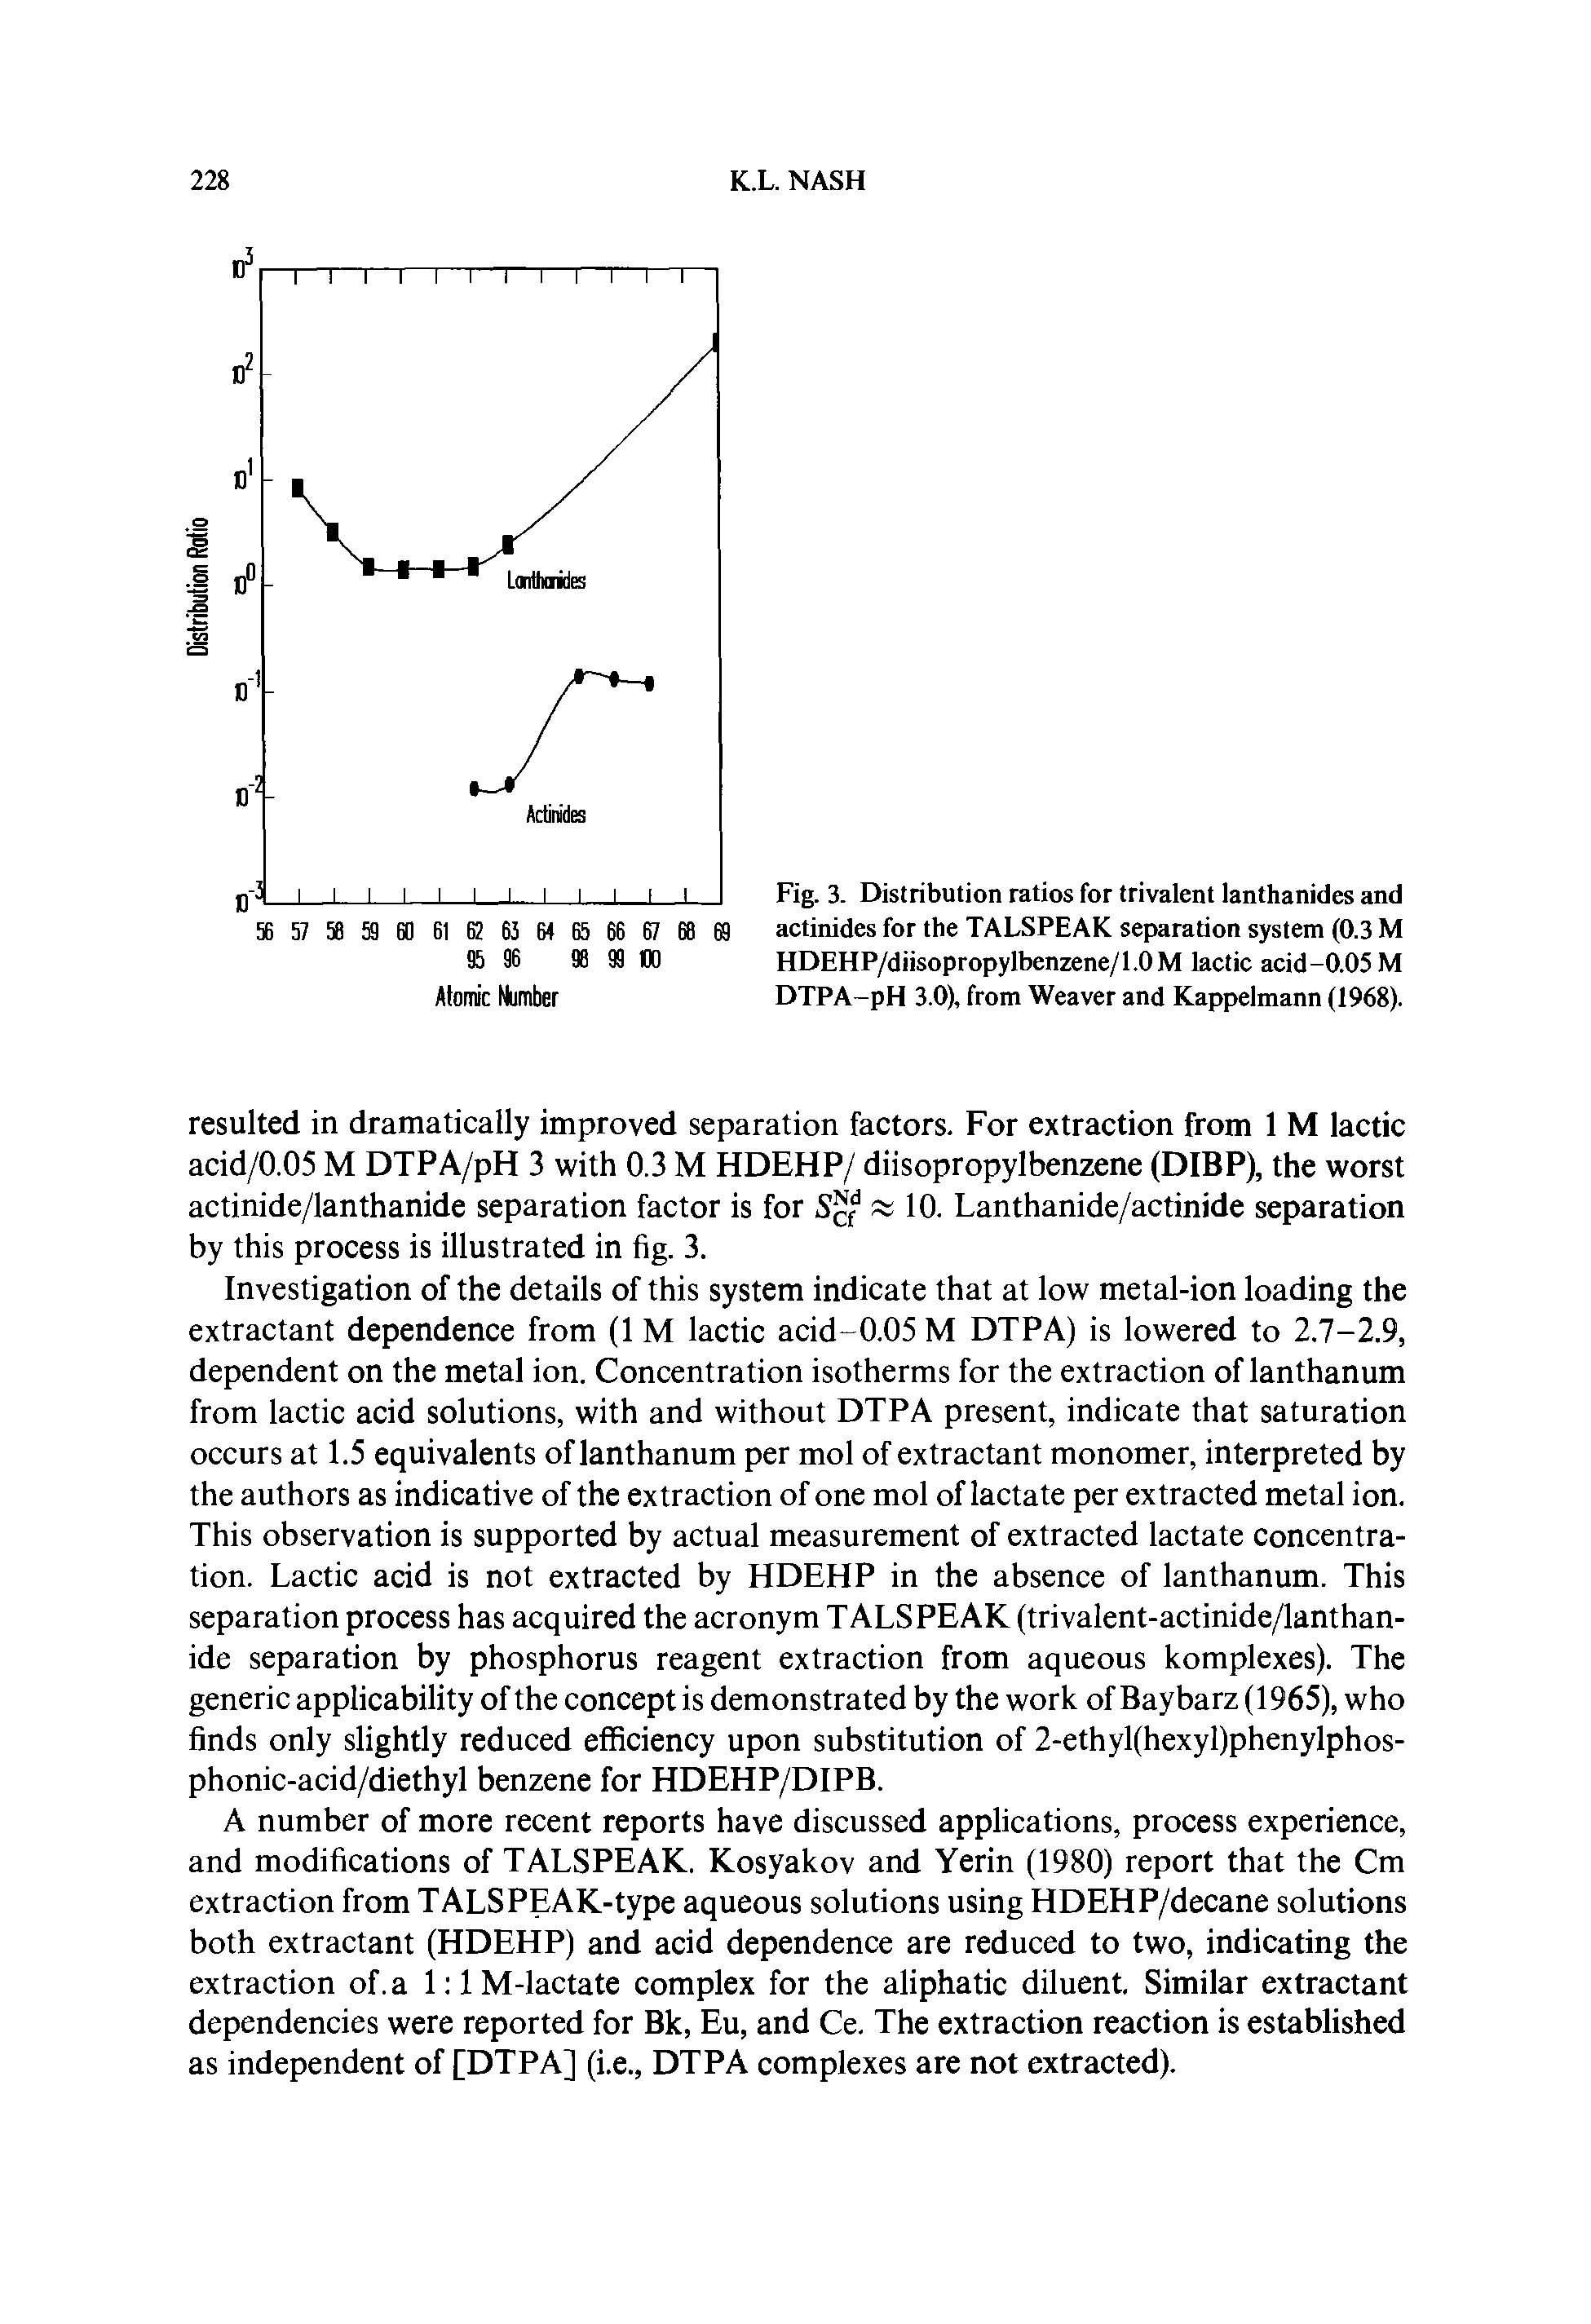 Fig. 3. Distribution ratios for trivalent lanthanides and actinides for the TALSPEAK separation system (0.3 M HDEHP/diisopropylbenzene/l.OM lactic acid-0.05 M DTPA-pH 3.0), from Weaver and Kappelmann (1968).